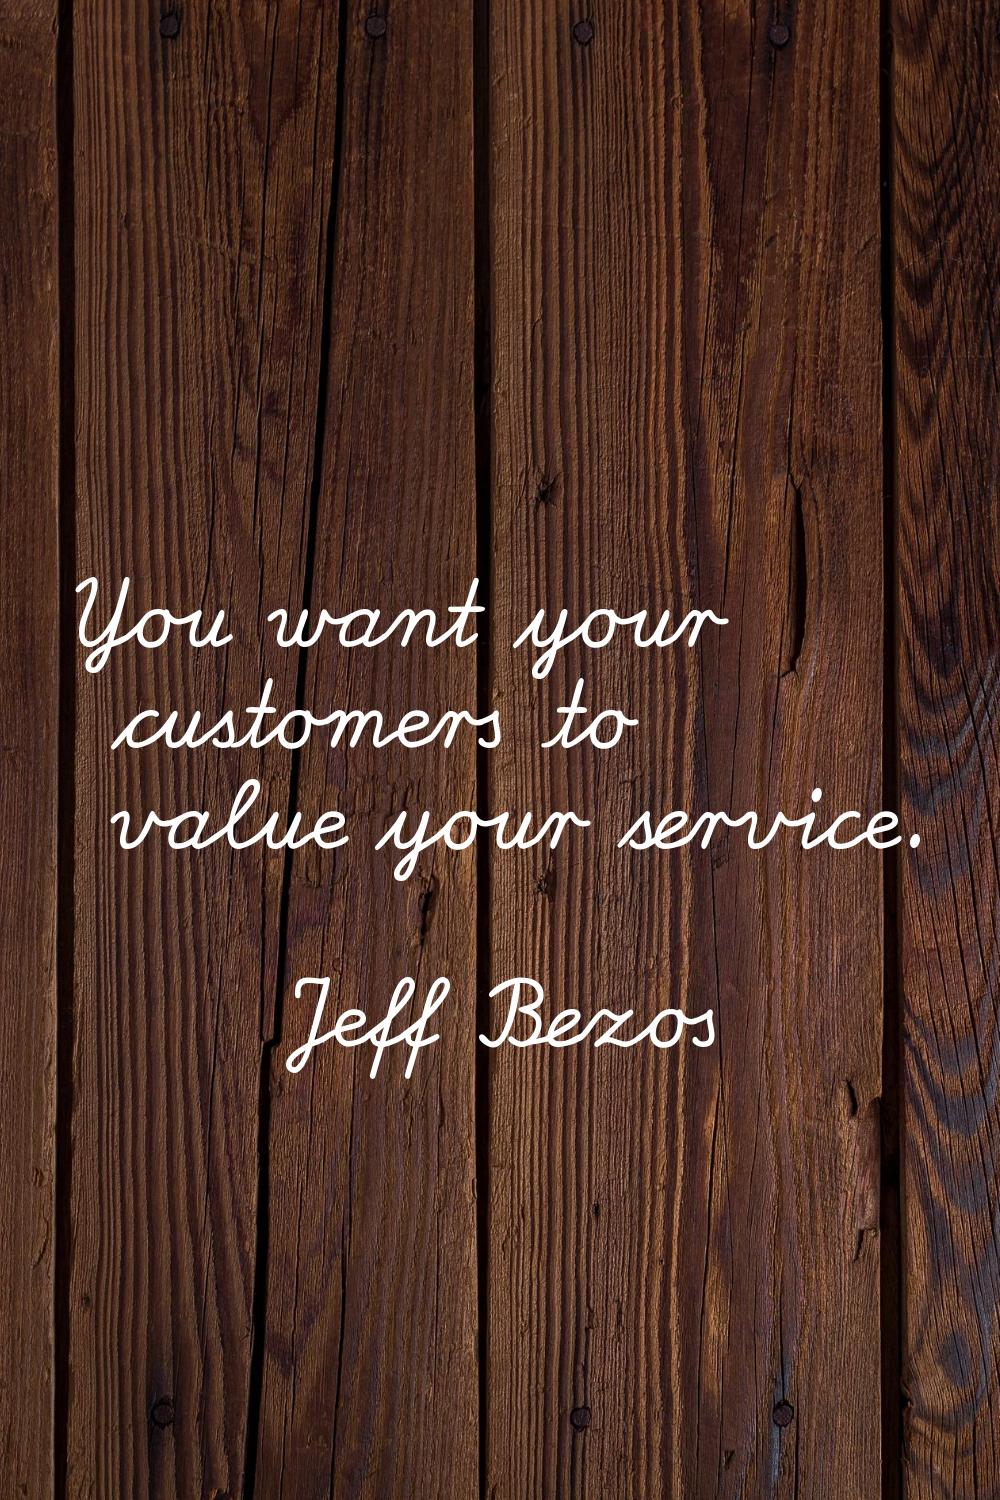 You want your customers to value your service.